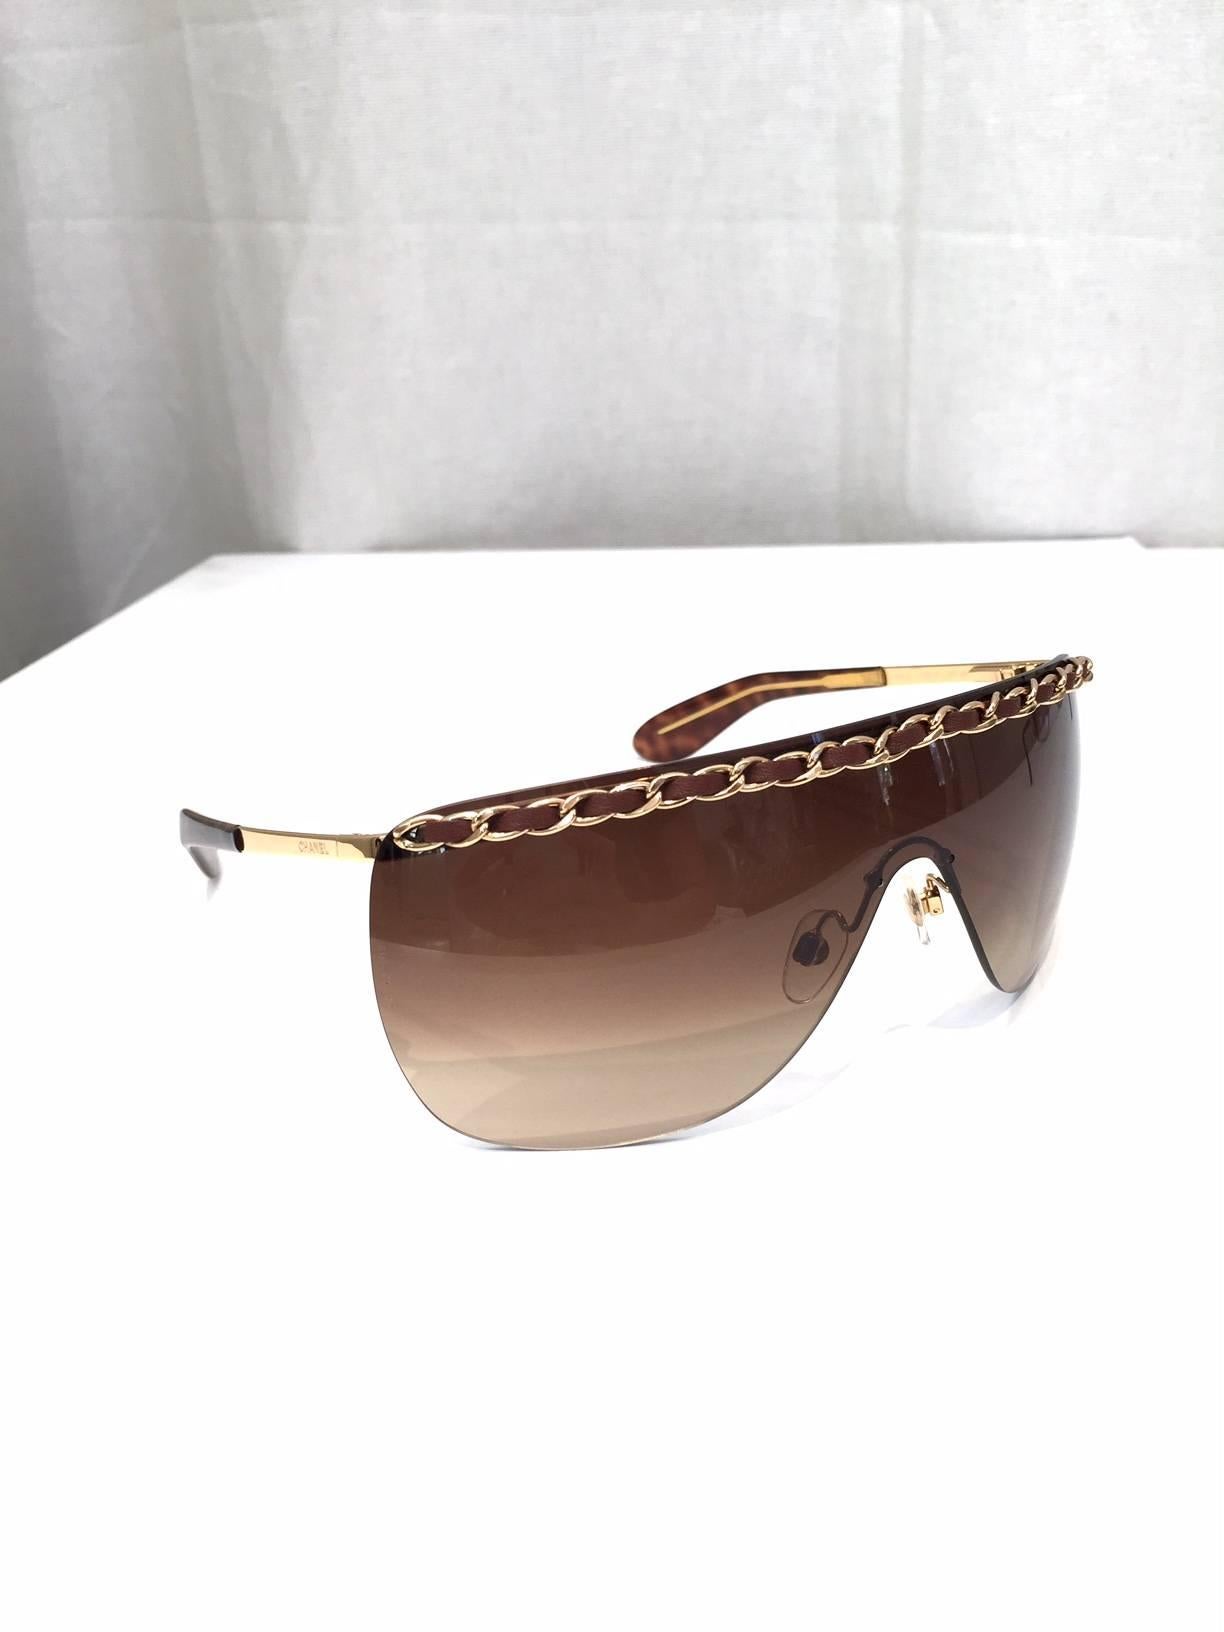 90s CHANEL brown lense sunglasses with leather and gold chain.
in excellent condition.